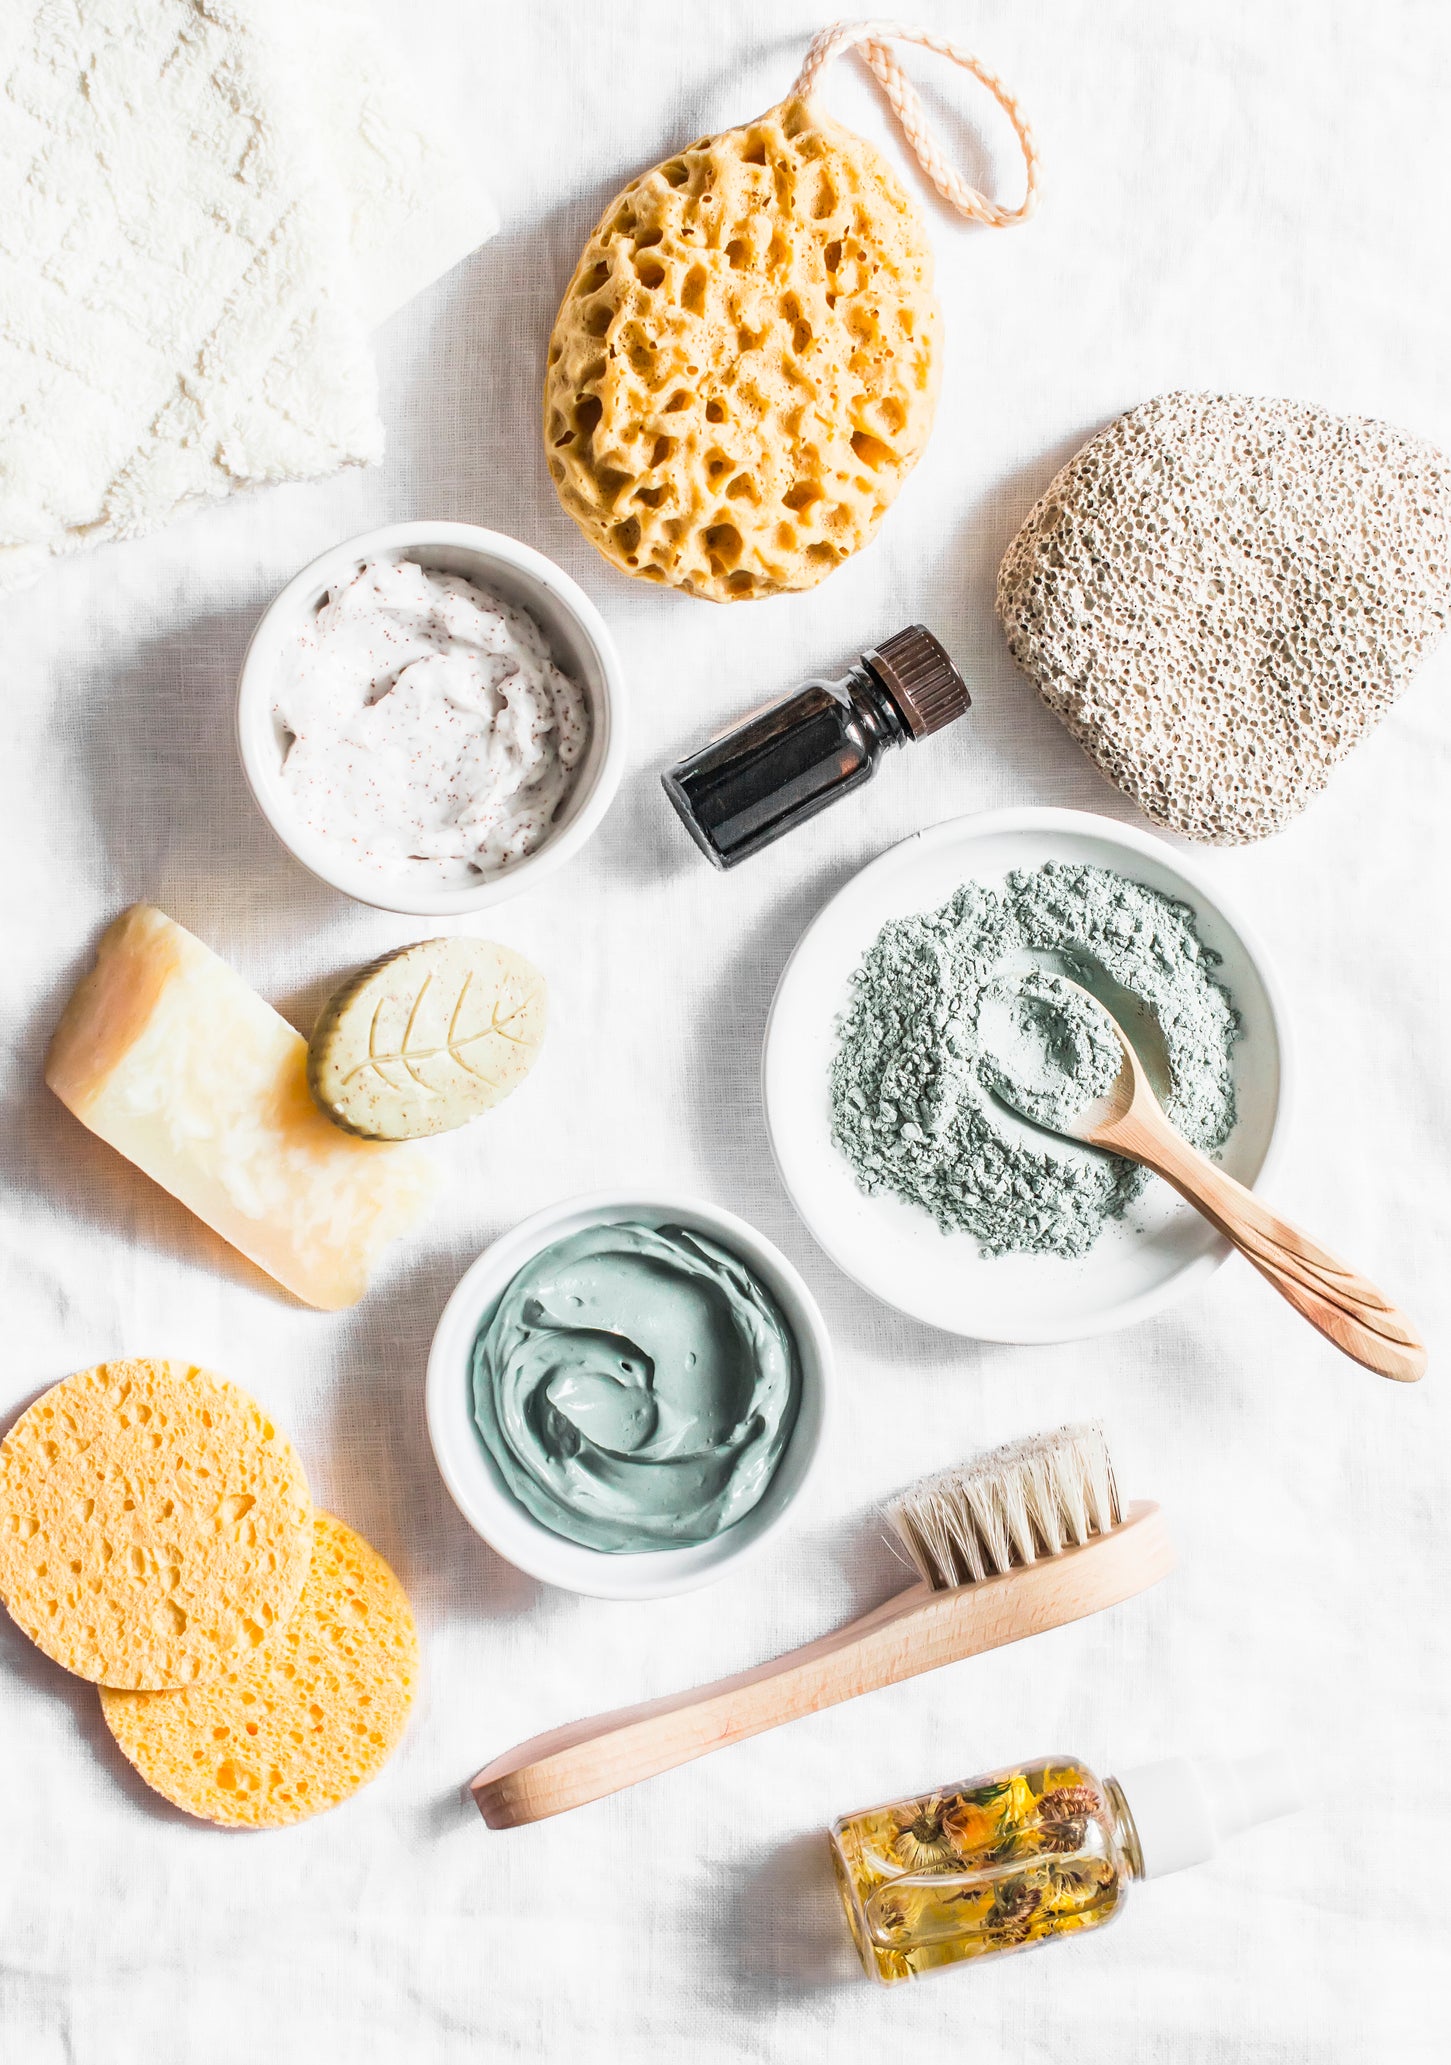 SEO: Spa accessories - nut scrub, sponge, facial brush, natural soap, clay face mask, pumice stone, essential oil on a light background, top view. Healthy lifestyle concept. Beauty, skin care. flat lay stock photo Beauty, Make-Up, Clean, Spa, Skin Care